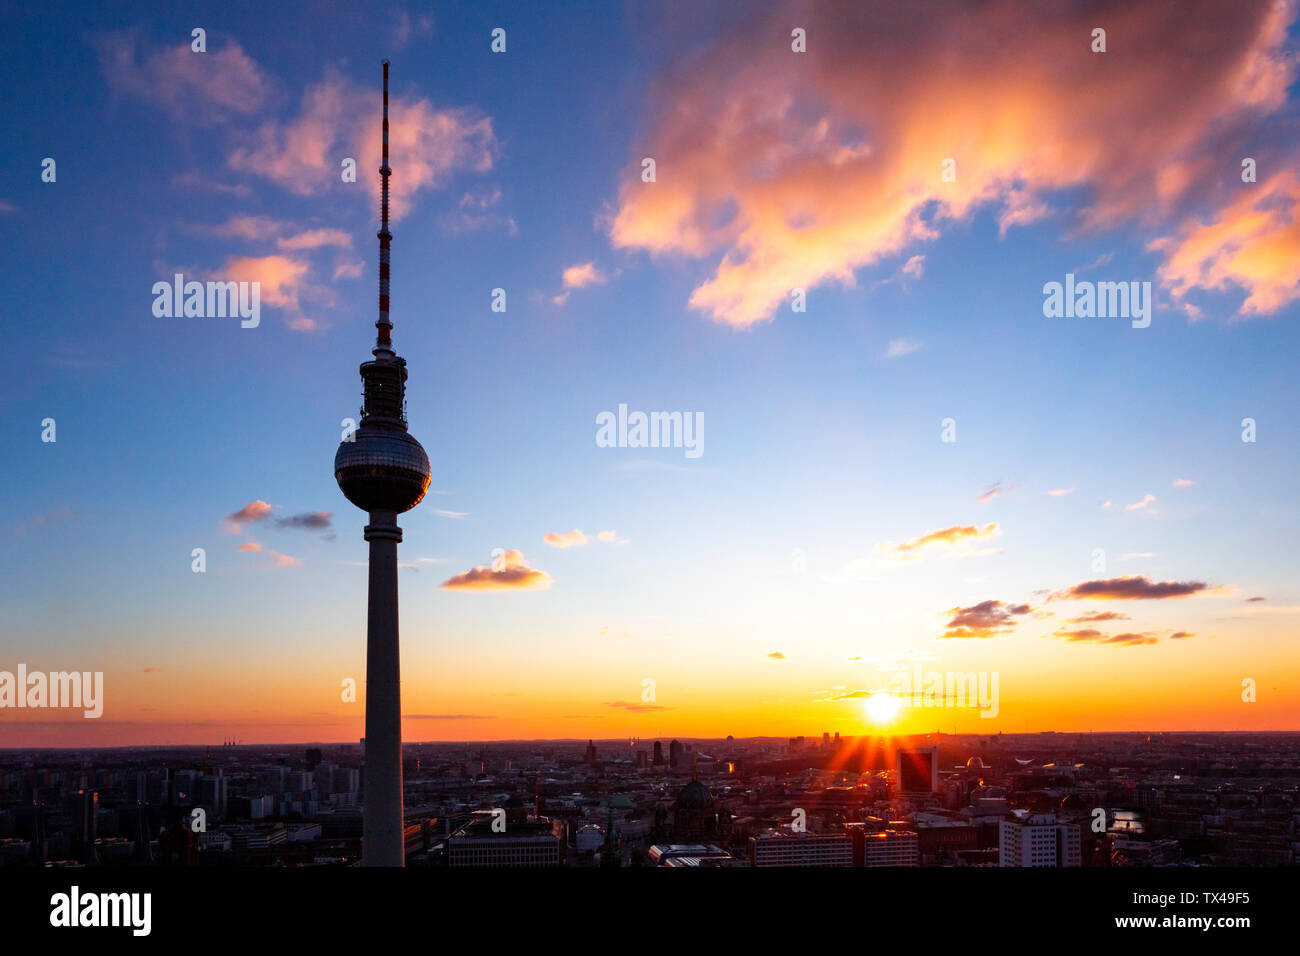 Germany, Berlin, silhouette of television tower at sunset Stock Photo